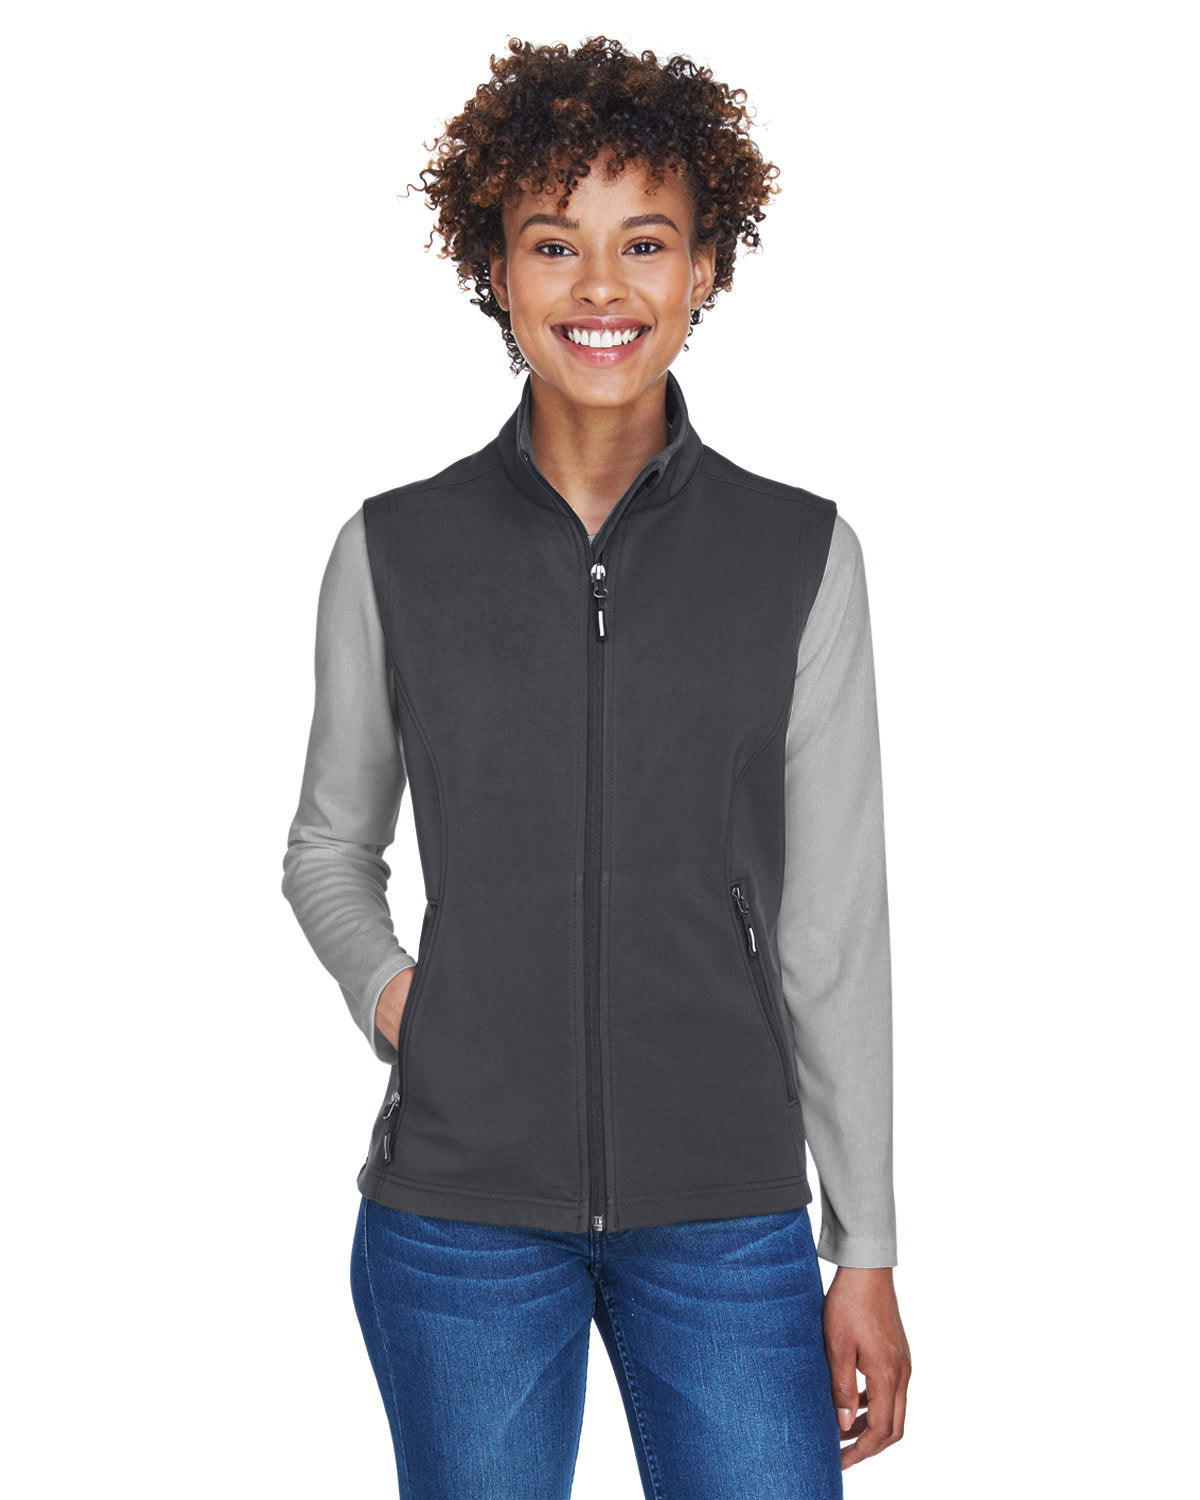 CORE365 Ladies' Cruise Two-Layer Fleece Bonded Soft Shell Vest with UNH logo